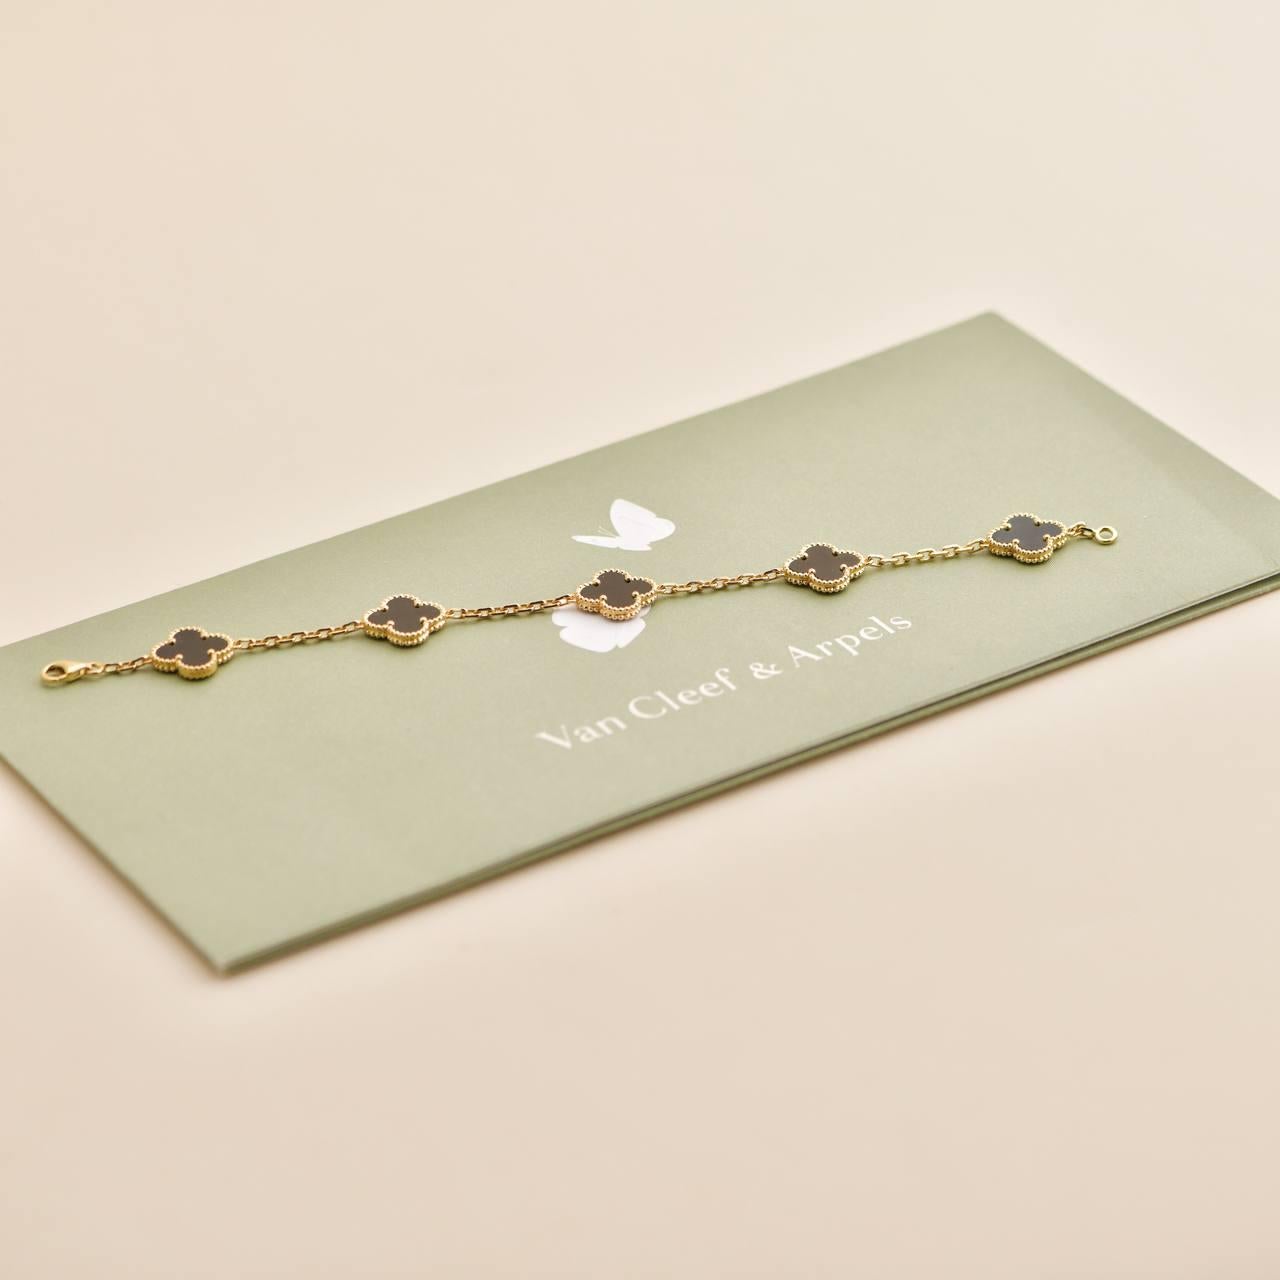 An 18k yellow gold bracelet from the Vintage Alhambra collection by Van Cleef and Arpels. The bracelet is made up of 5 iconic clover motifs, each set with a beaded edge and a black onyx inlay, set throughout the length of the chain.

SKU